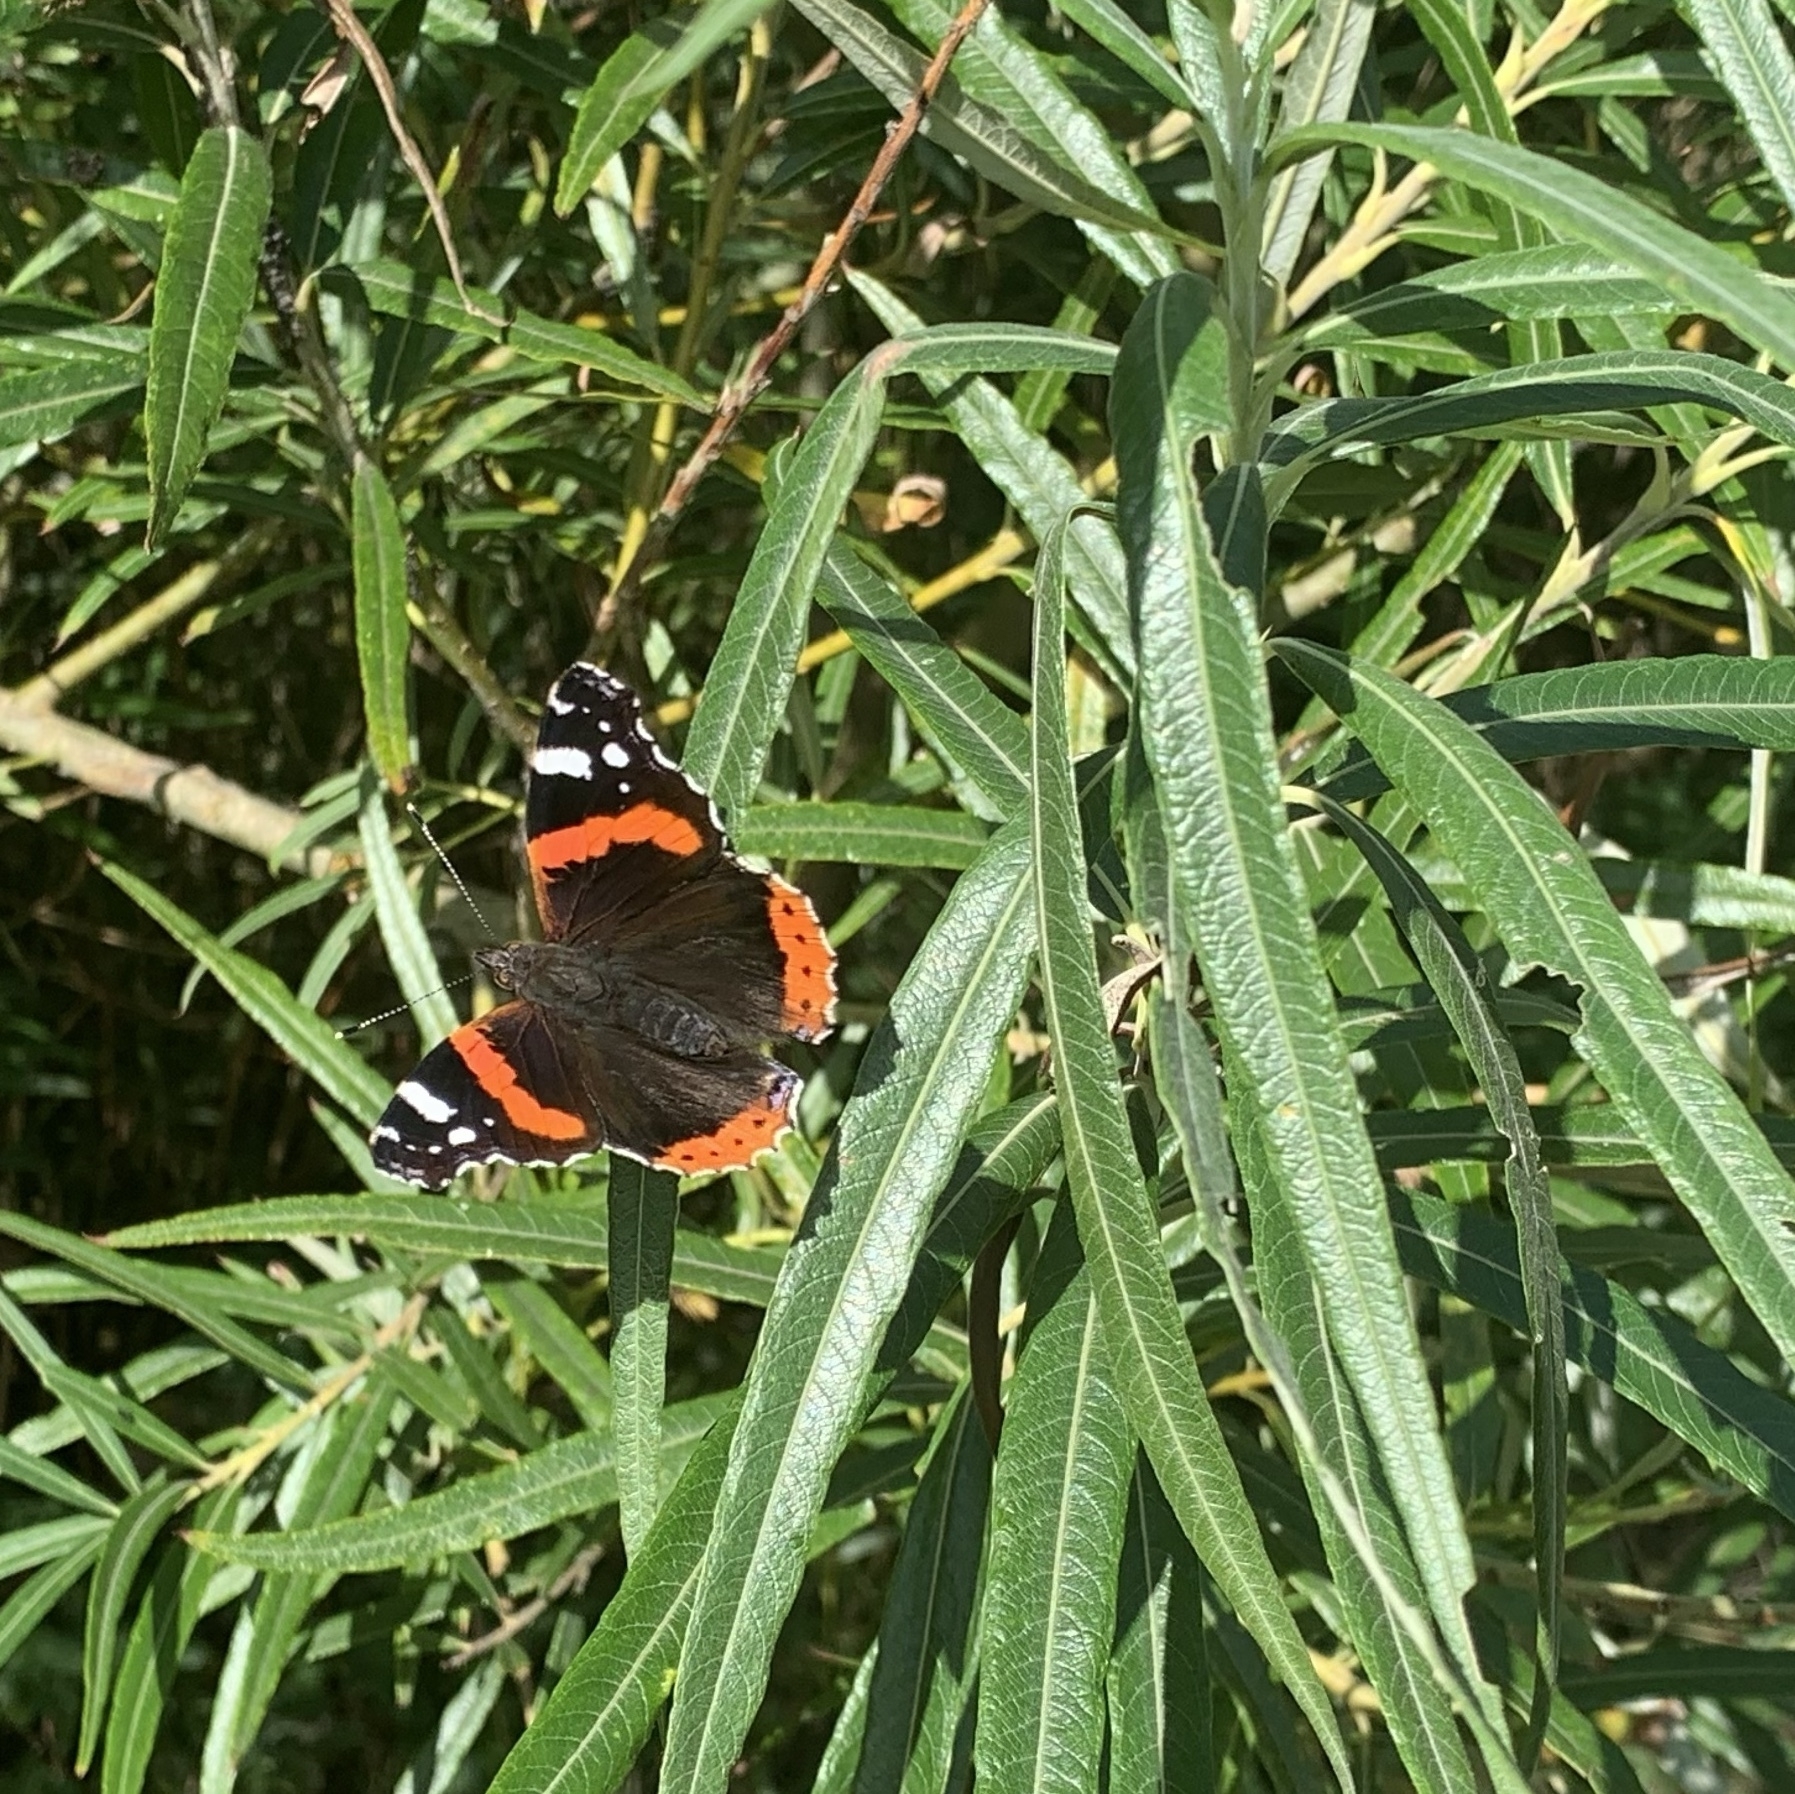 Red admiral butterfly sitting on long grass